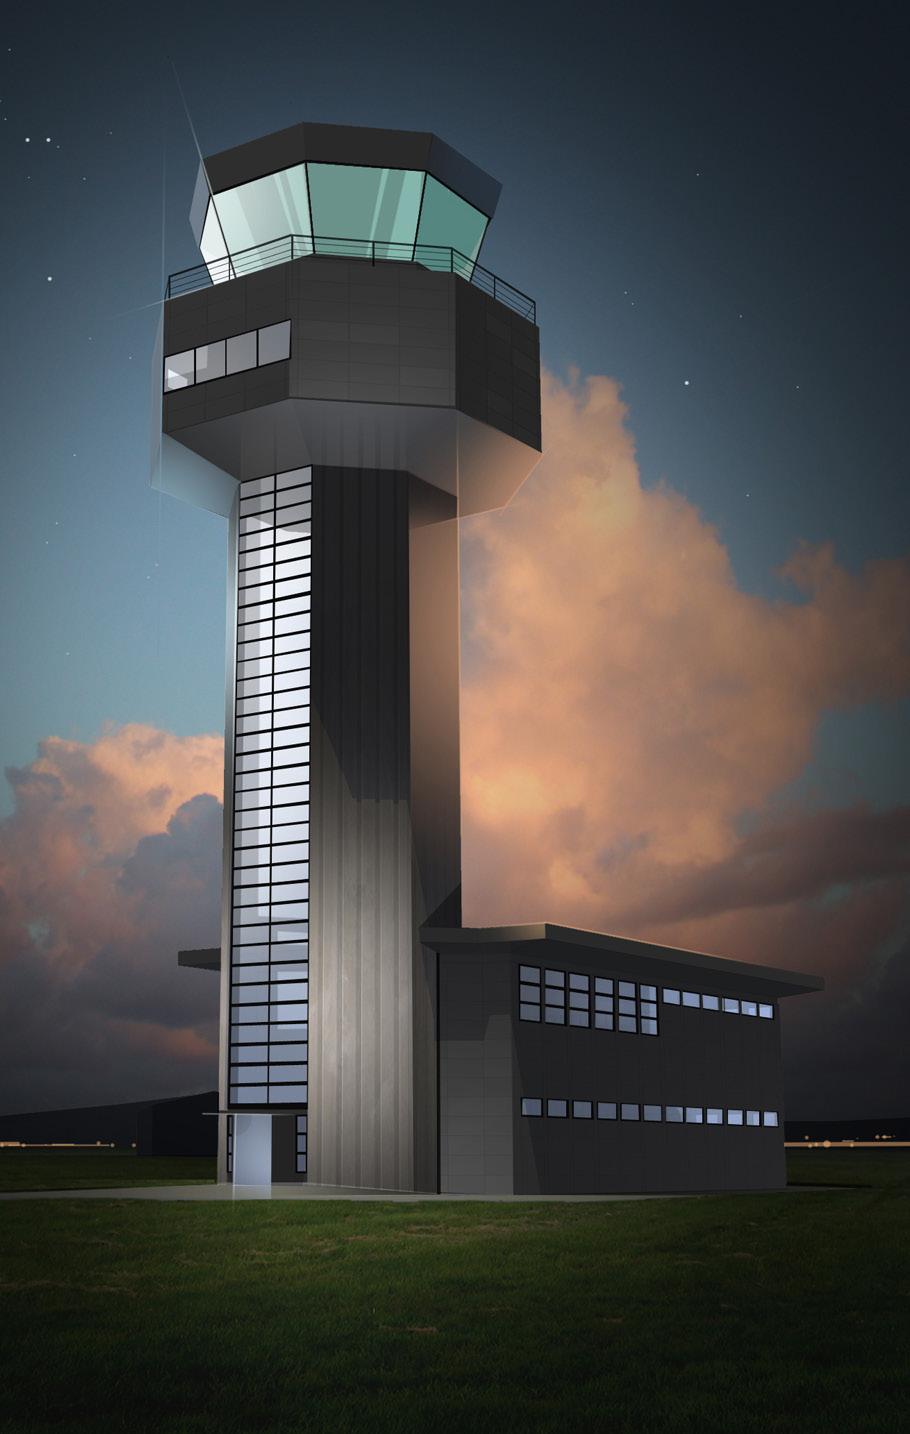 Transportation Our award-winning experience in the transport sector includes designing and completing eight air traffic control towers - more than any other architectural practice in the UK.